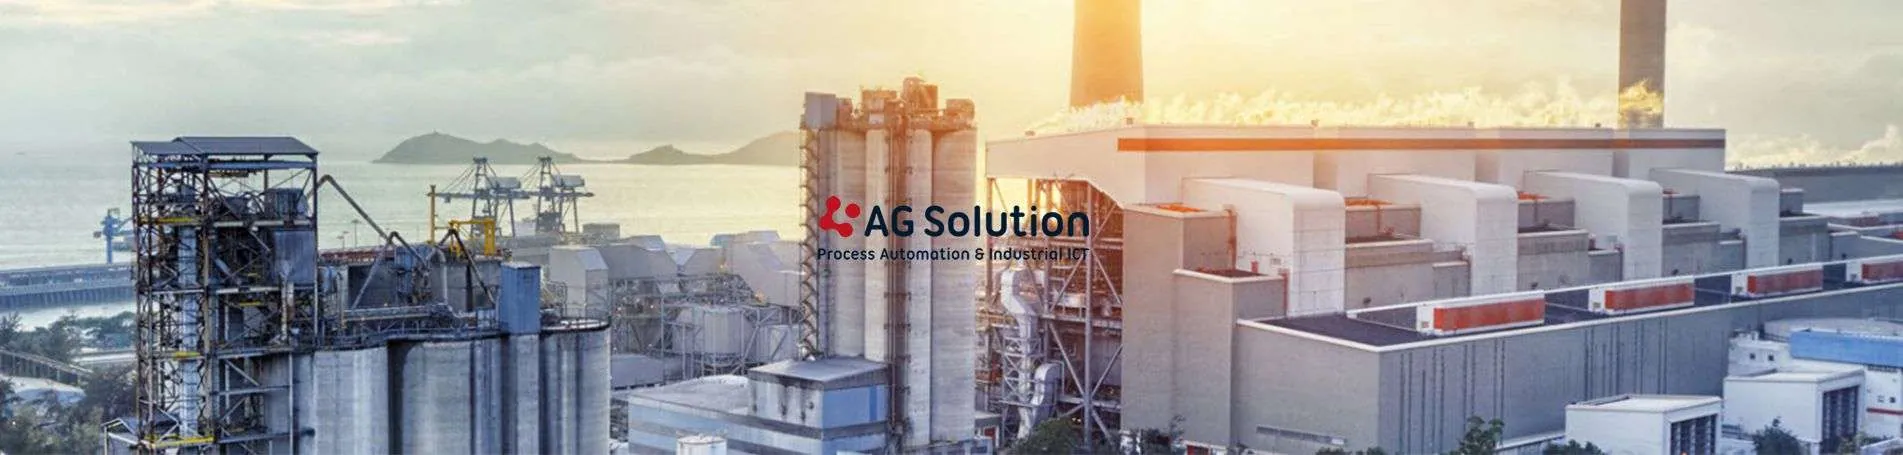 Marketing Outsourcing para AG Solution Group